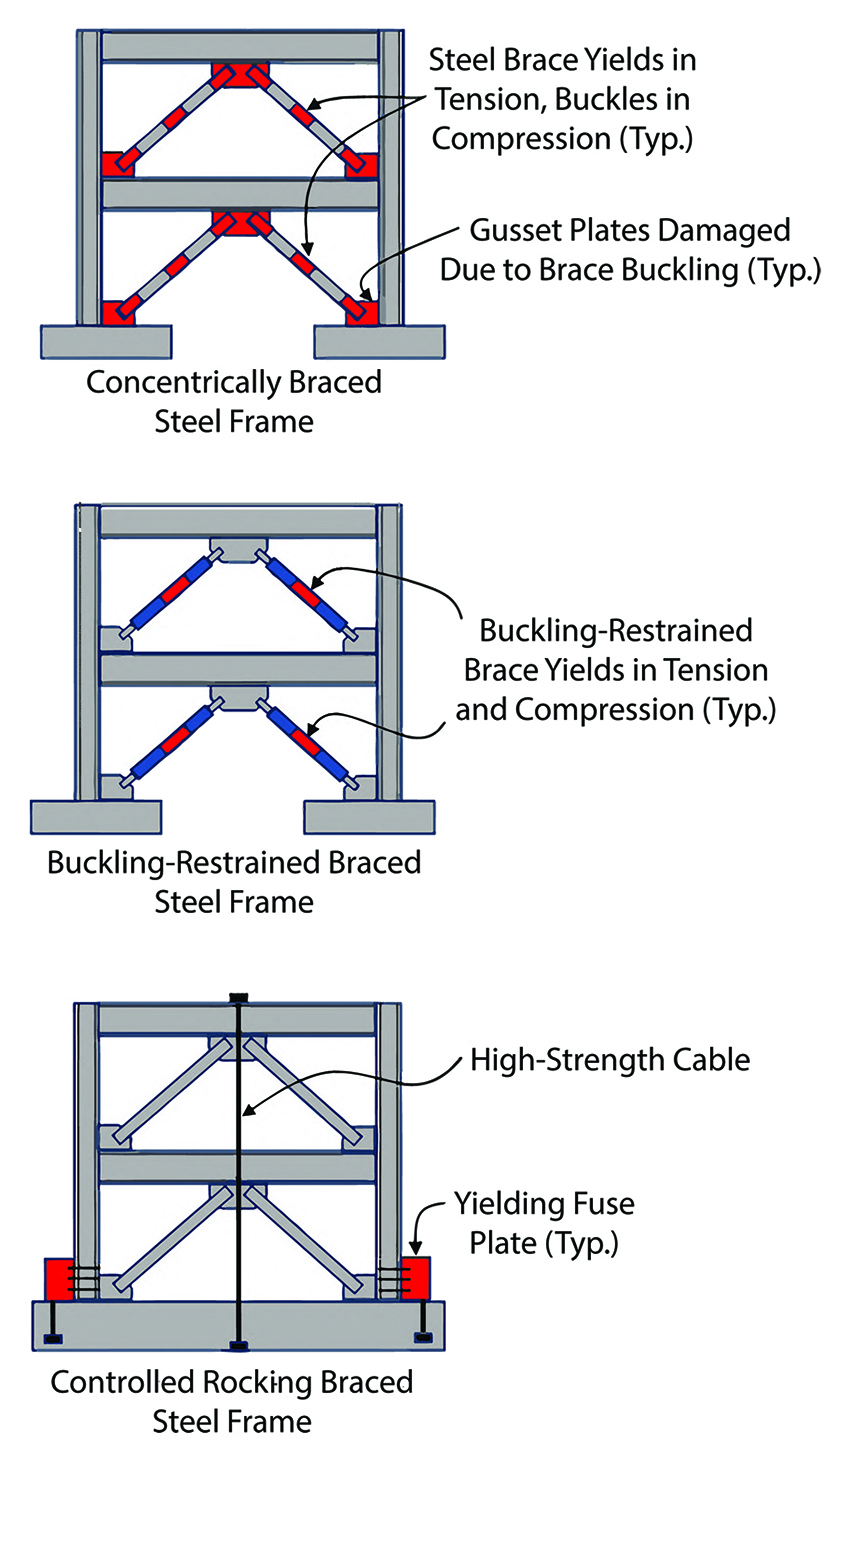 Figure shows a comparison between a concentrically braced steel frame, a buckling-restrained steel frame, and a controlled rocking braced steel frame. 